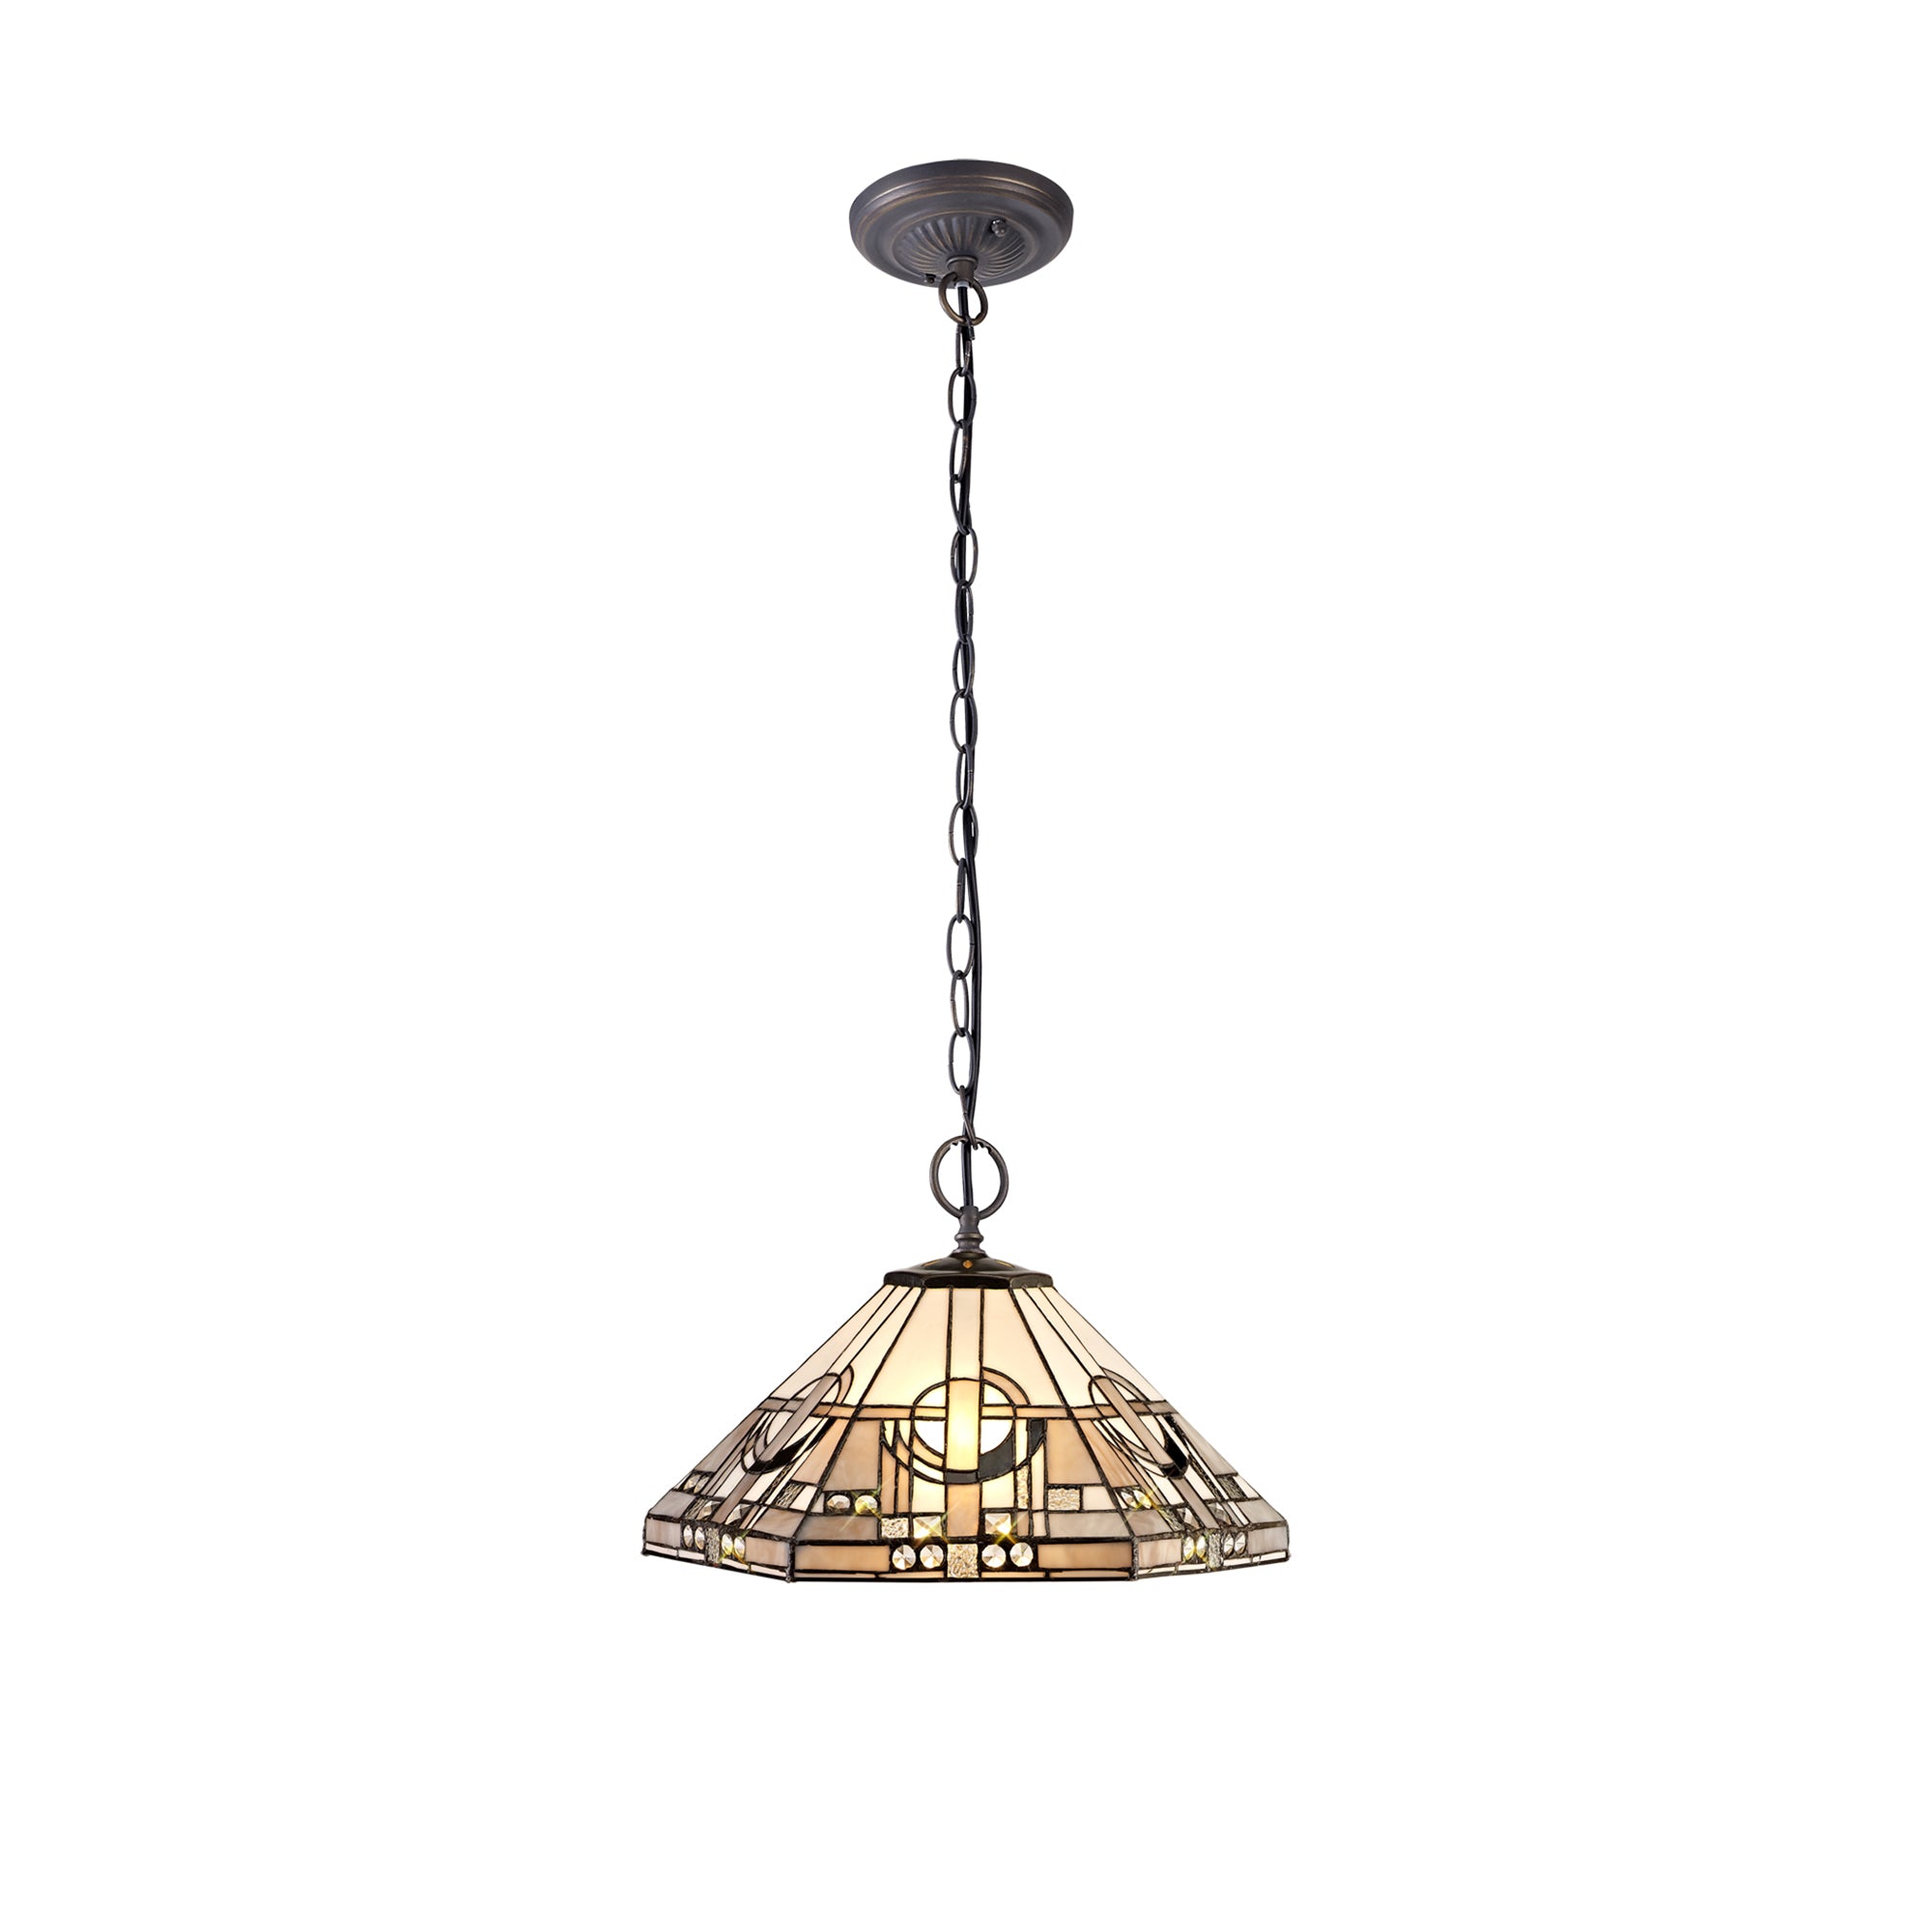 Atek 2 Light Downlighter Pendant E27 With 40cm Tiffany Shade, White/Grey/Black/Clear Crystal/Aged Antique Brass